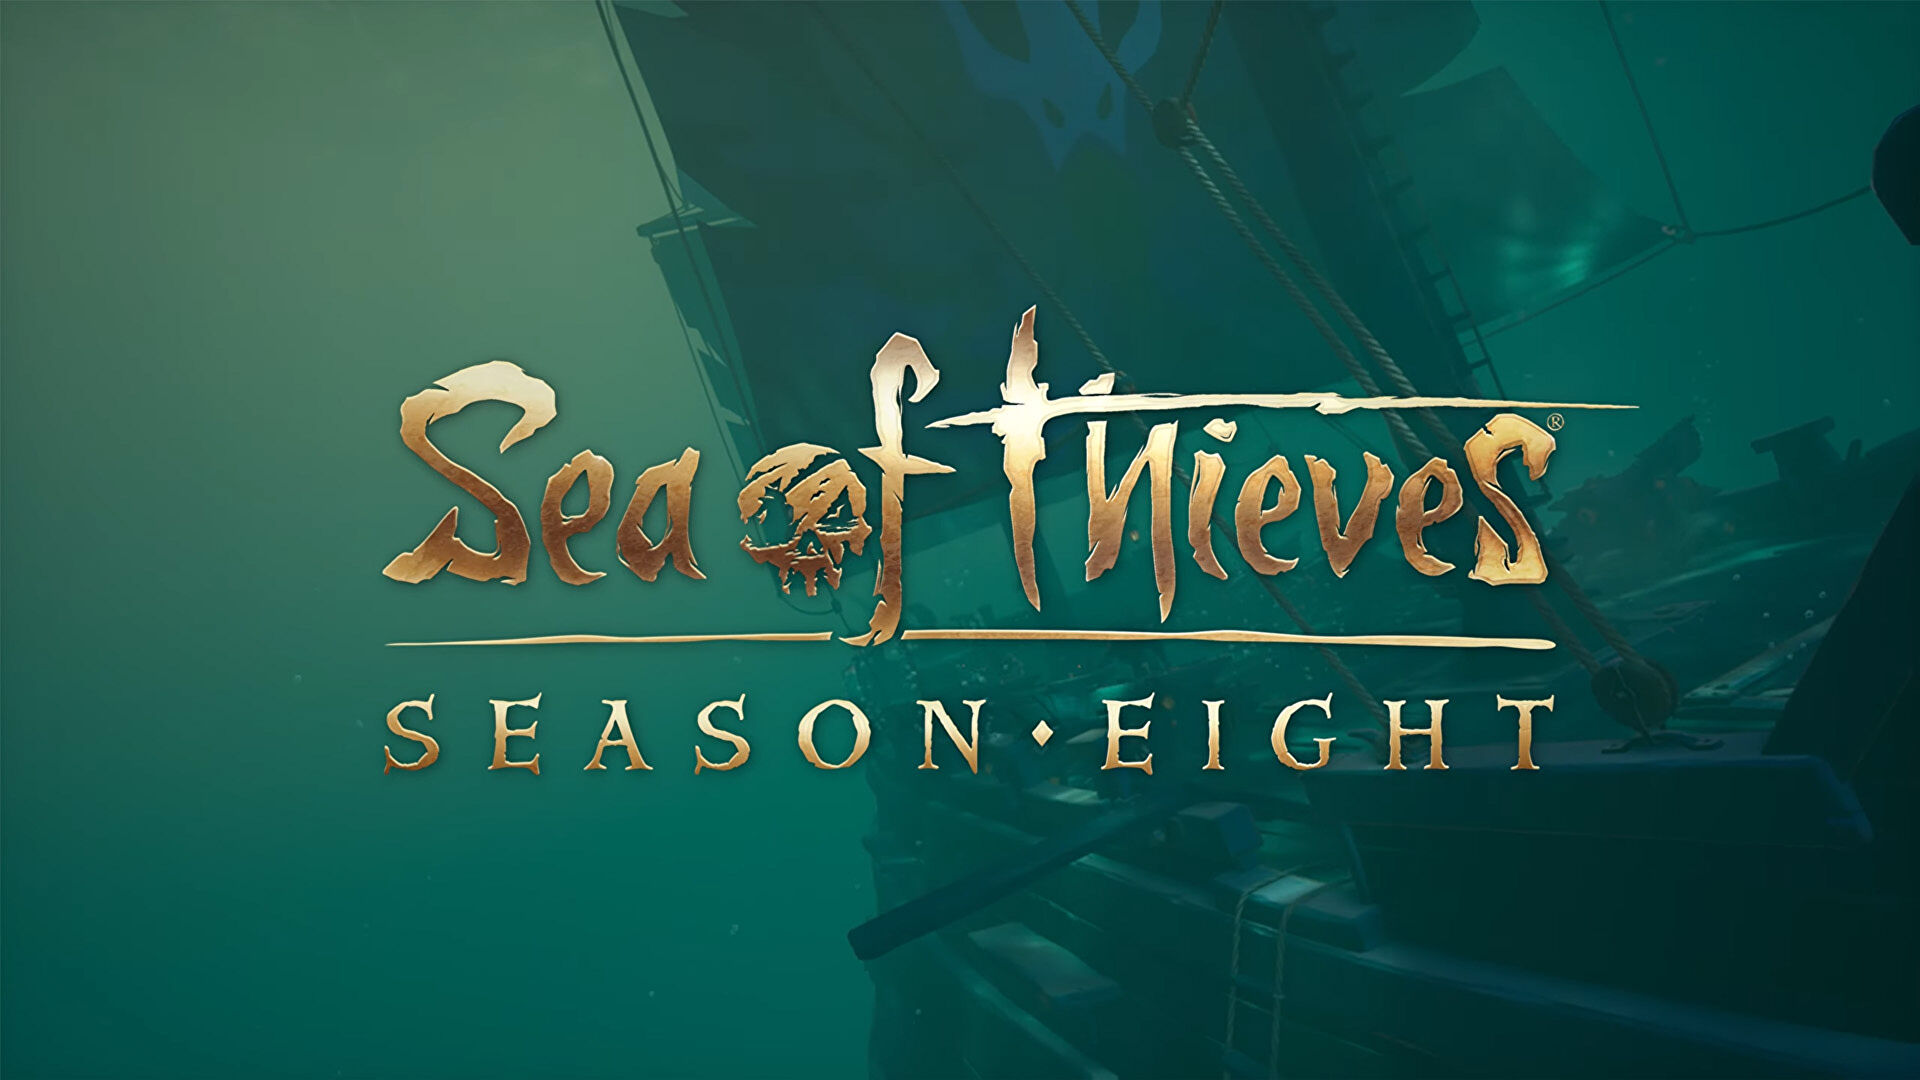 Sea Of Thieves' Season 8 Brings New Life To PvP With On Demand, Faction Action